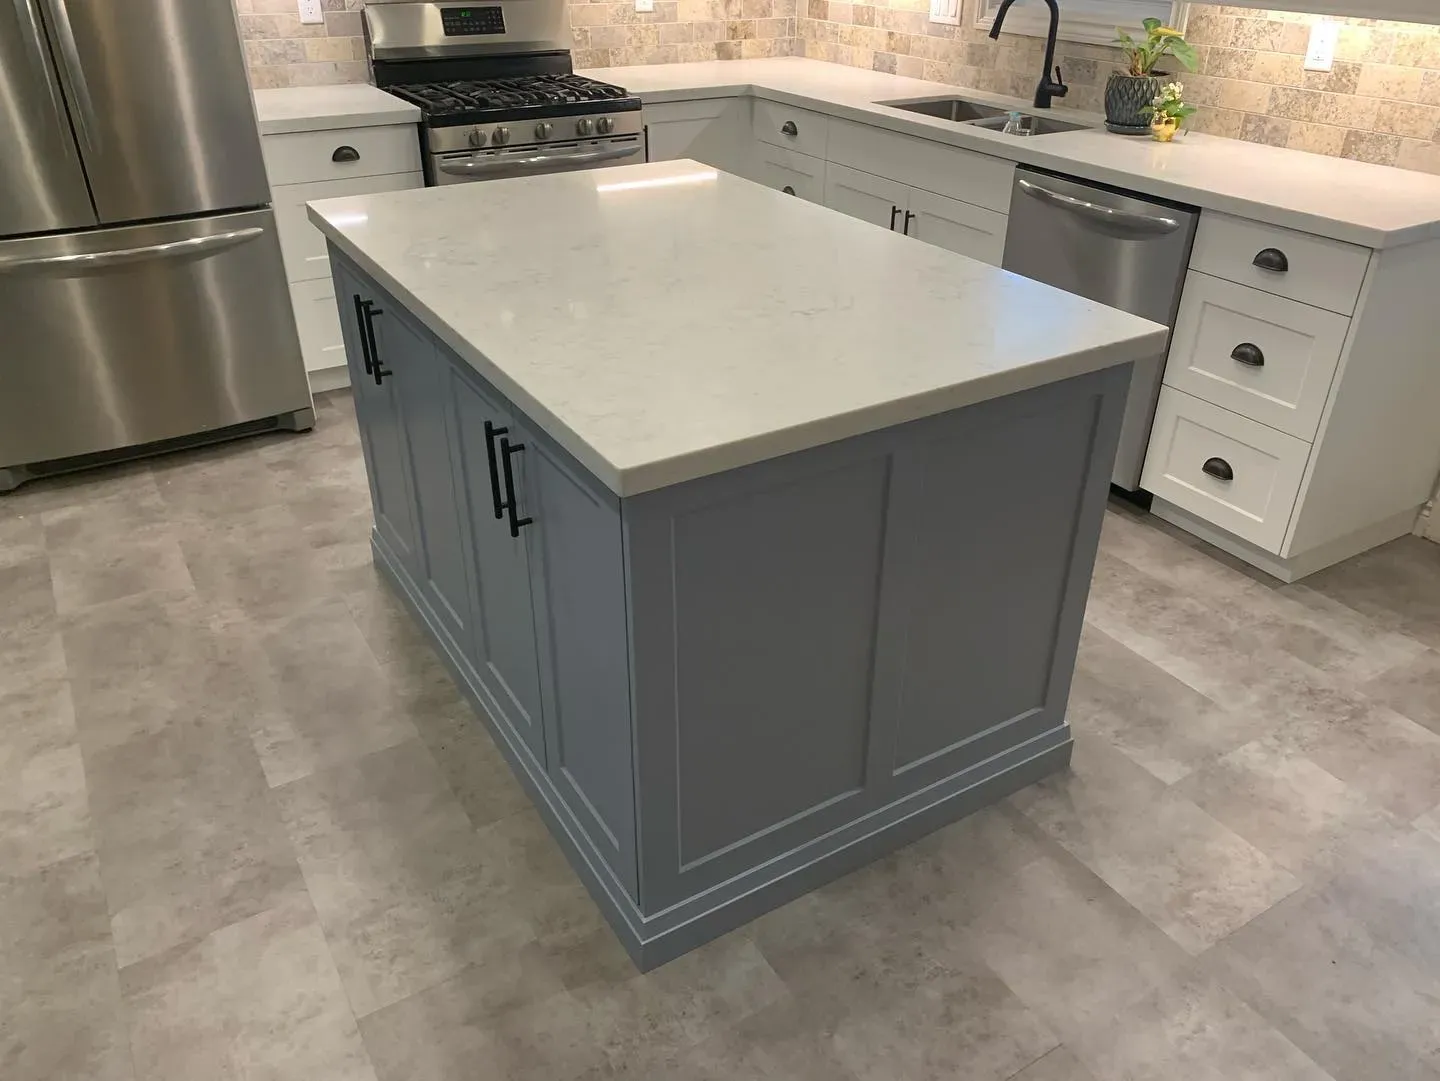 Benjamin Moore New Hope Gray kitchen cabinets color